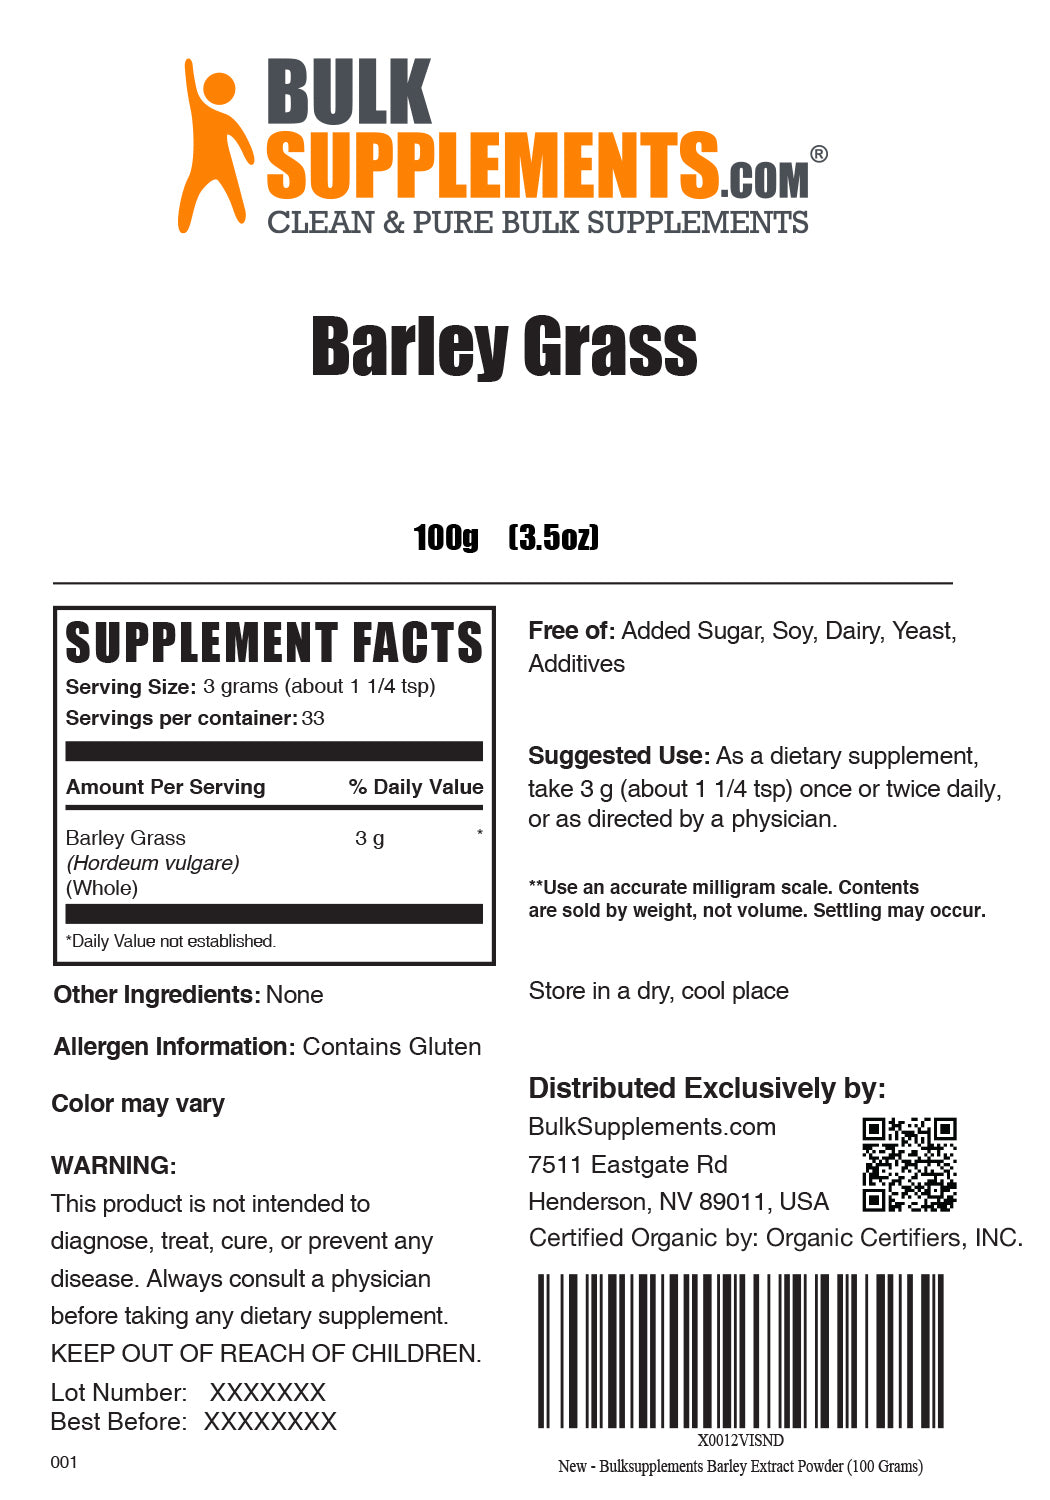 Barley Grass Powder Supplement Facts and Serving Size for 100g bag